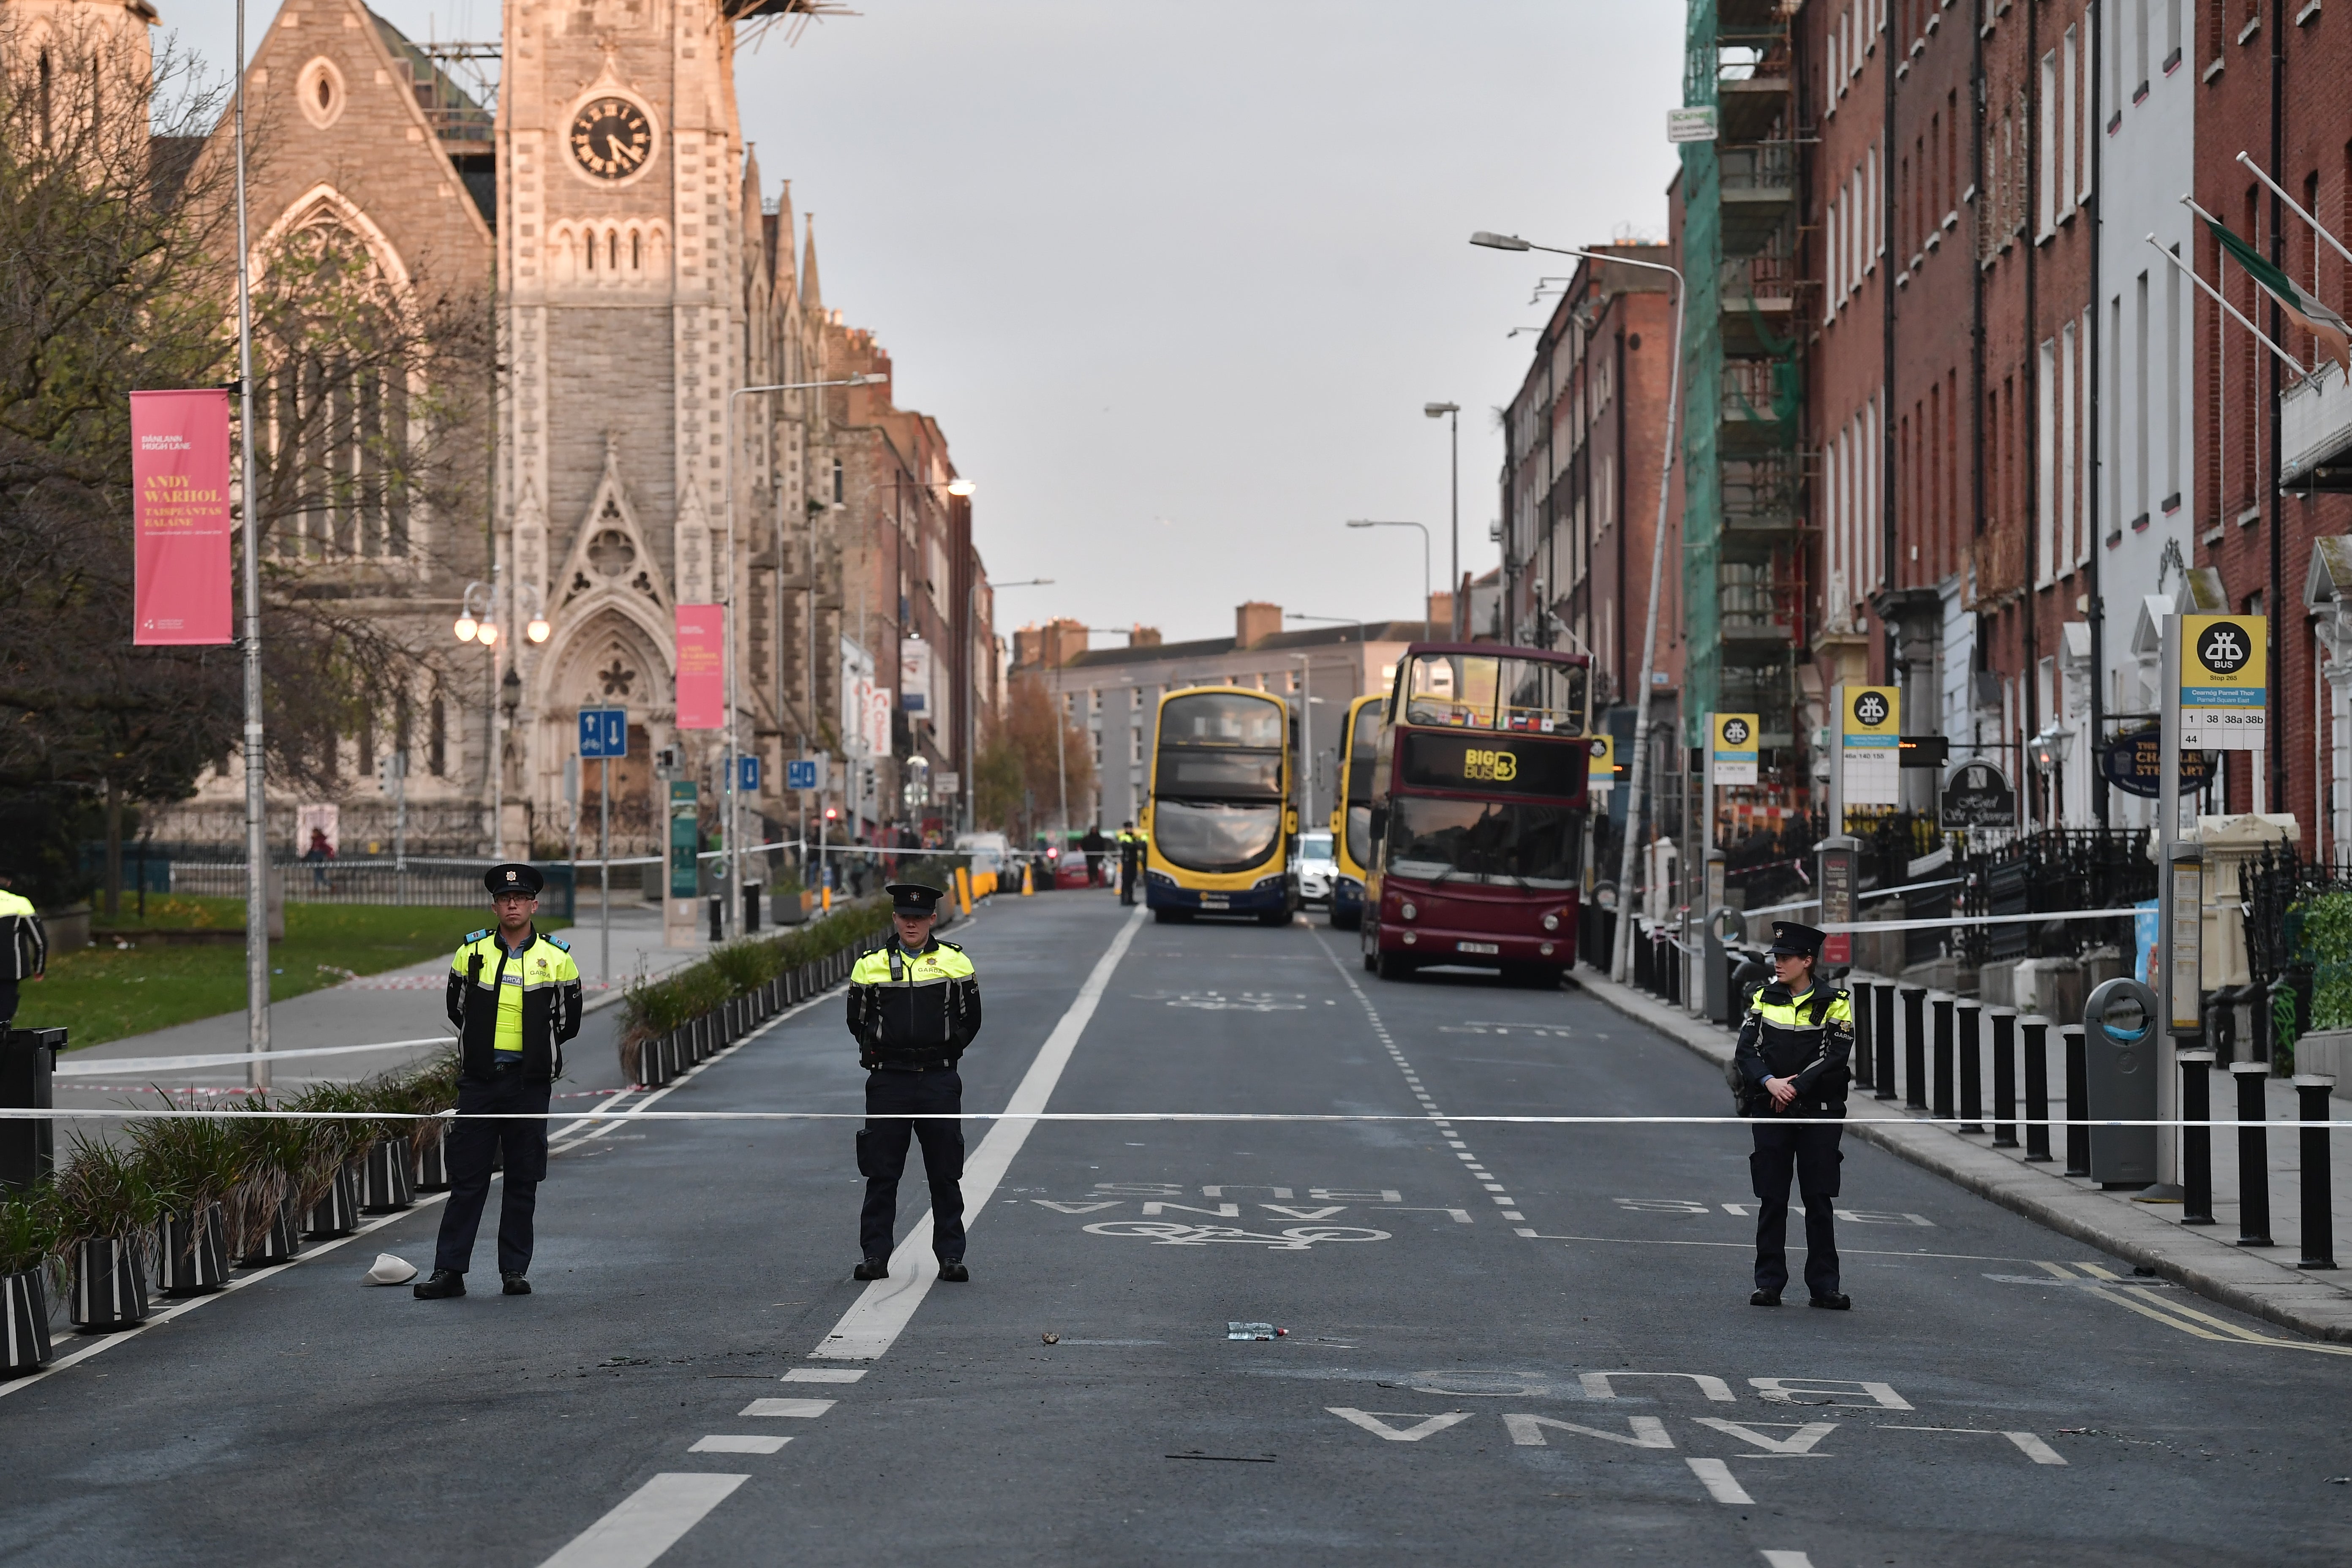 Three police officers stand near the crime scene from Thursday’s stabbing on Friday in Dublin, Ireland